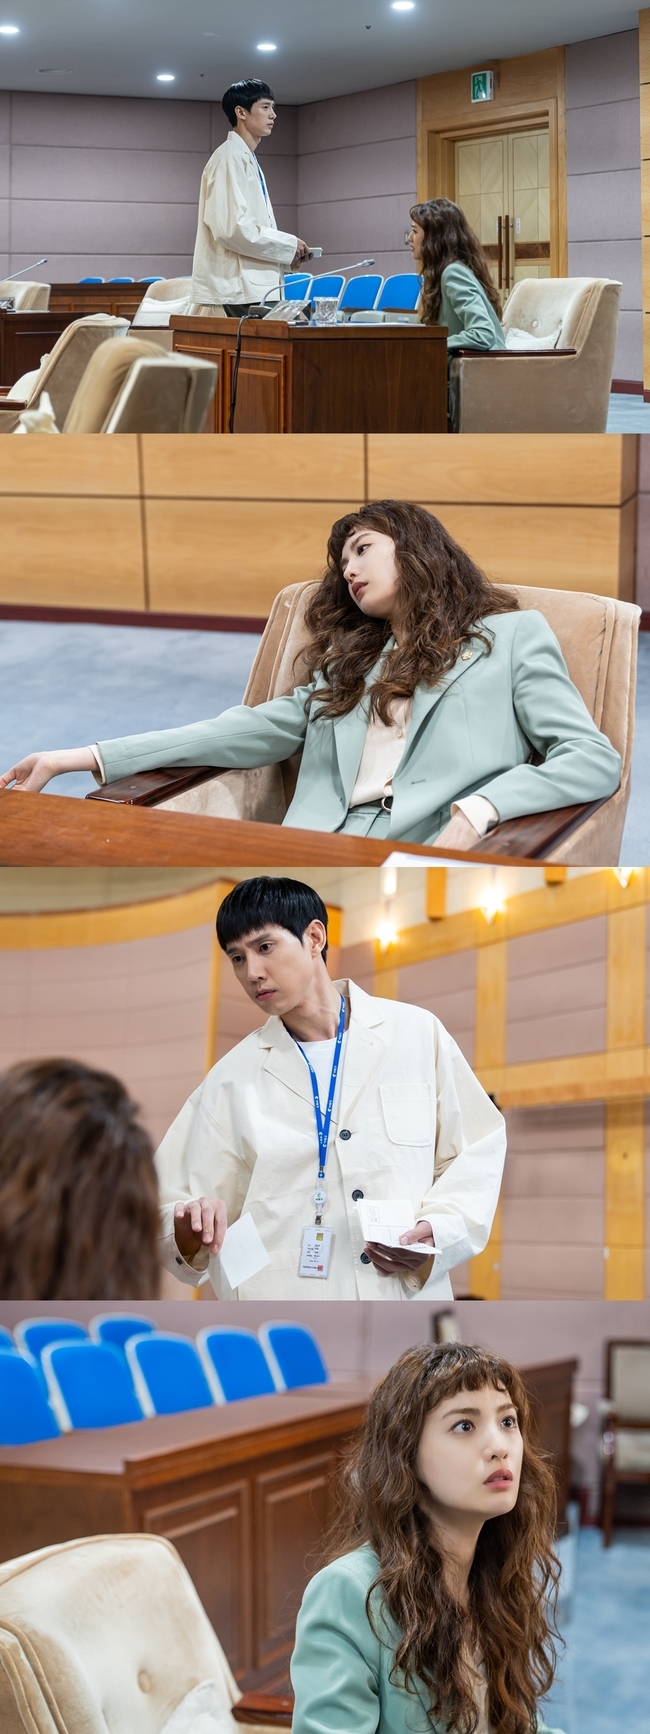 Chu Shi Biao Nana sprawled, and Park Sung-hoon panicked. What happened?KBS 2TV Tree Drama, which was broadcast on July 9, ended with the crisis of the former Sarah (Nana), the panicked Seo Gong-myeong (Park Sung-hoon), and the four episodes of Chu Shi Biao (played by Moon Hyun-kyung/directed by Hwang Seung-ki, Choi Yeon-soo/produced Celltrion Entertainment, Frame Media/hereinafter, Chu Shi Biao) The audience is curious about it.Earlier, after being forced to fire, former Sarah threw Chu Shi Biao in the Members of the By-election, which received 90 days a year and a salary of 50 million won.The first time, the first time he had stopped the reckless-looking challenge of the old Sarah, he knew the true nature of the old Sarah and kept silently by her side and cheered in his heart.So Sarah was elected to the Mayan District Members of the House by three votes.But for a moment, the joy of the election also came to the fact that Sarah was bullied in the council and ran out of money.Since then, the Mawon-gu council has voted for the issuance of 30 billion local bonds, but it has been rejected.Cho Myeong-deok (Guideliner) declared that he should not receive Paycheck until the members of the National Assembly and the Mawon-gu finances are restored.This is the situation where Sarahs Paycheck will be cut off.Meanwhile, on July 14, the production team of Cheu Shi Biao unveiled the frustrated old Sarah and the embarrassed Seo Gong-myeong by Sarah, who were in the process of failing to use Paycheck, shortly after the fourth ending.In the photo, Sarah and Seogong-myeong are alone in the main assembly room of the Mawon-gu district, where Sarah sits in a chair, as if in a mesmerizing mood.Seo Gong-myeong seems to be talking about something by holding out ballot papers to Koo Sarah.What the popular name of the sky is saying, Sarah is surprised to see the sky sky with his rabbit eyes, standing up on the spot.kim myeong-mi